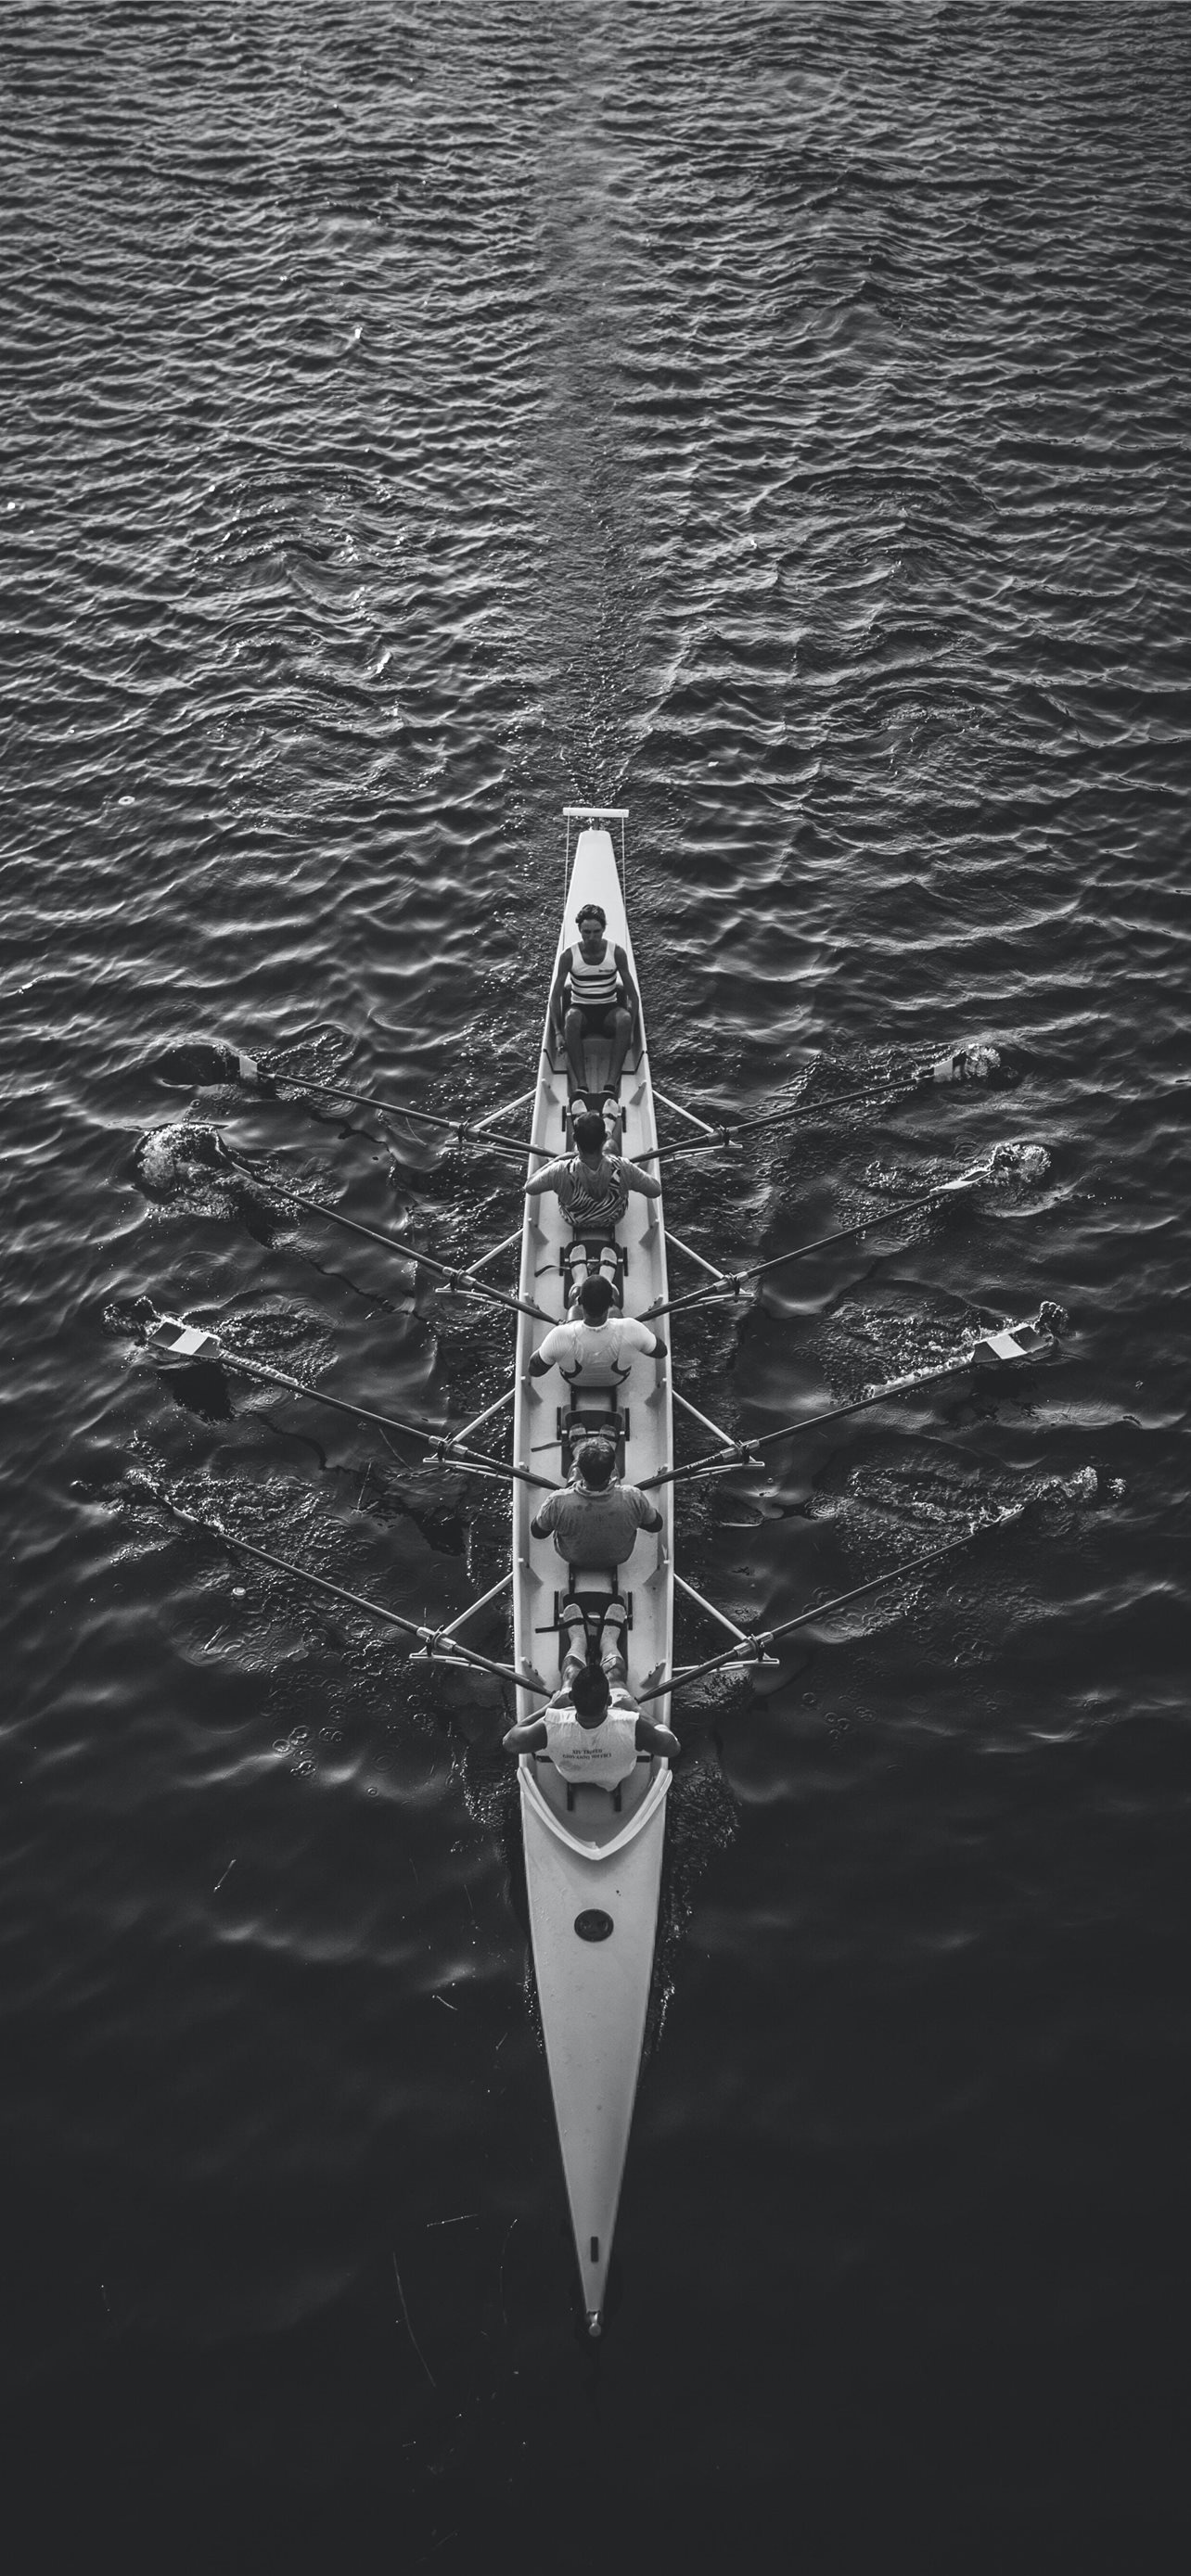 Rowing: A monochrome racing boat full of scullers - athletes who use two oars to navigate over the water. 1290x2780 HD Wallpaper.